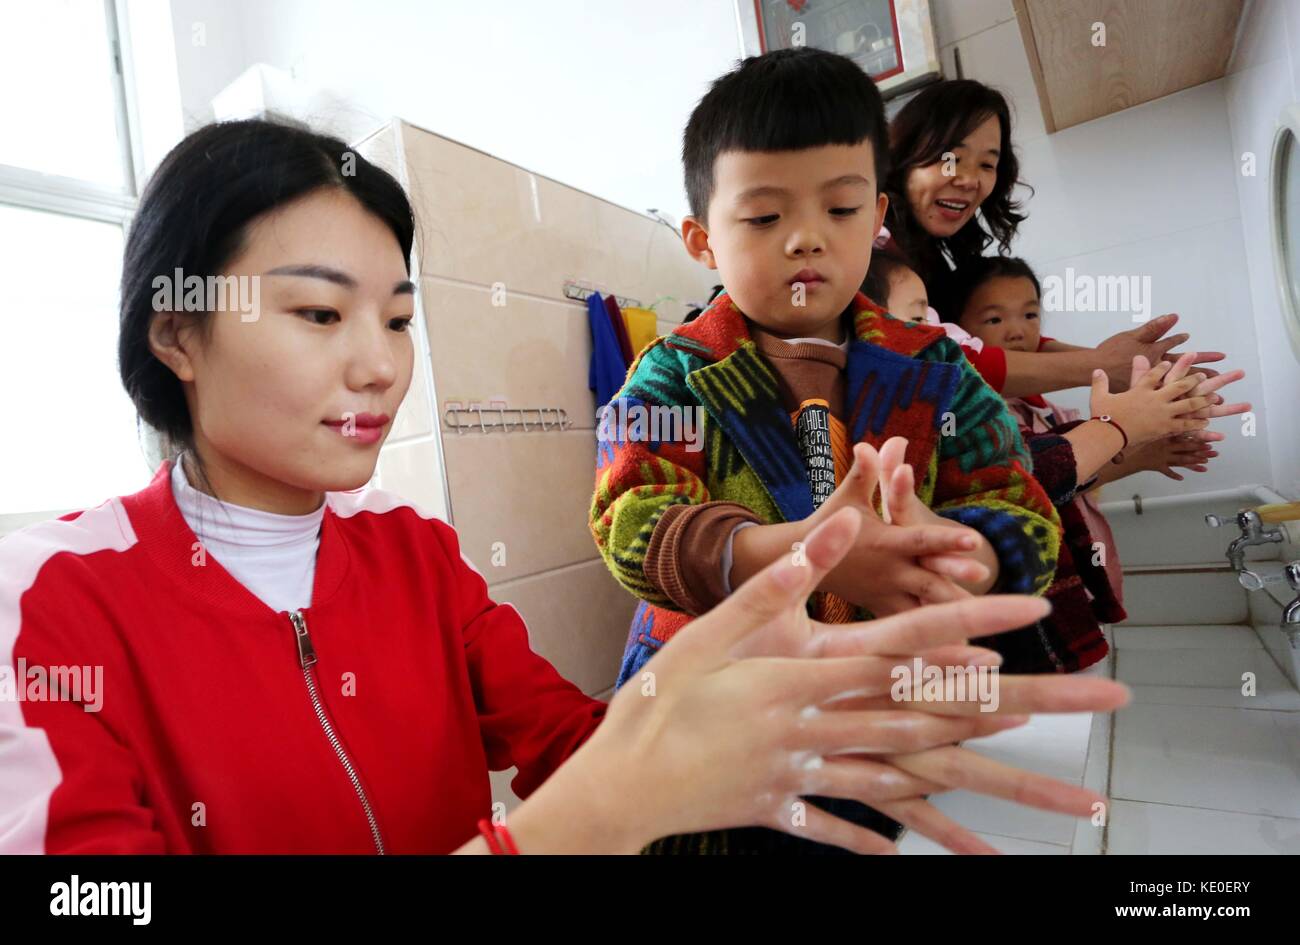 Lianyungang, Lianyungang, China. 17th Oct, 2017. Lianyungang, CHINA-13th October 2017: (EDITORIAL USE ONLY. CHINA OUT).Children learn to wash hands at a kindergarten in Lianyungang, east China's Jiangsu Province, marking the Global Hand-washing Day. Credit: SIPA Asia/ZUMA Wire/Alamy Live News Stock Photo